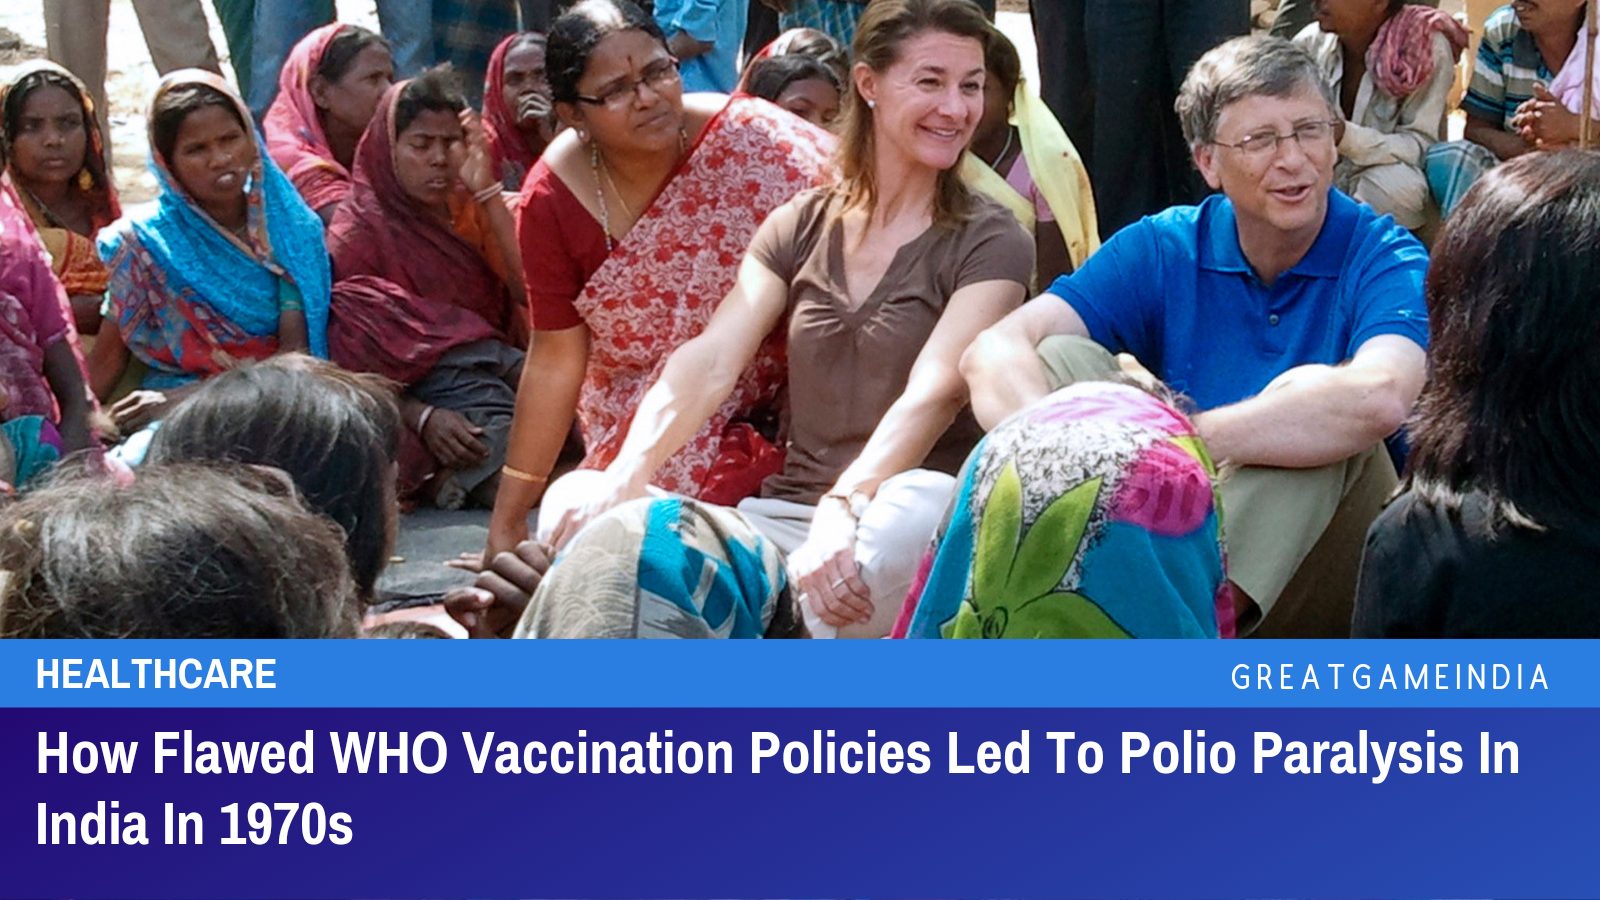 How Flawed WHO Vaccination Policies Led To Polio Paralysis In India In 1970s